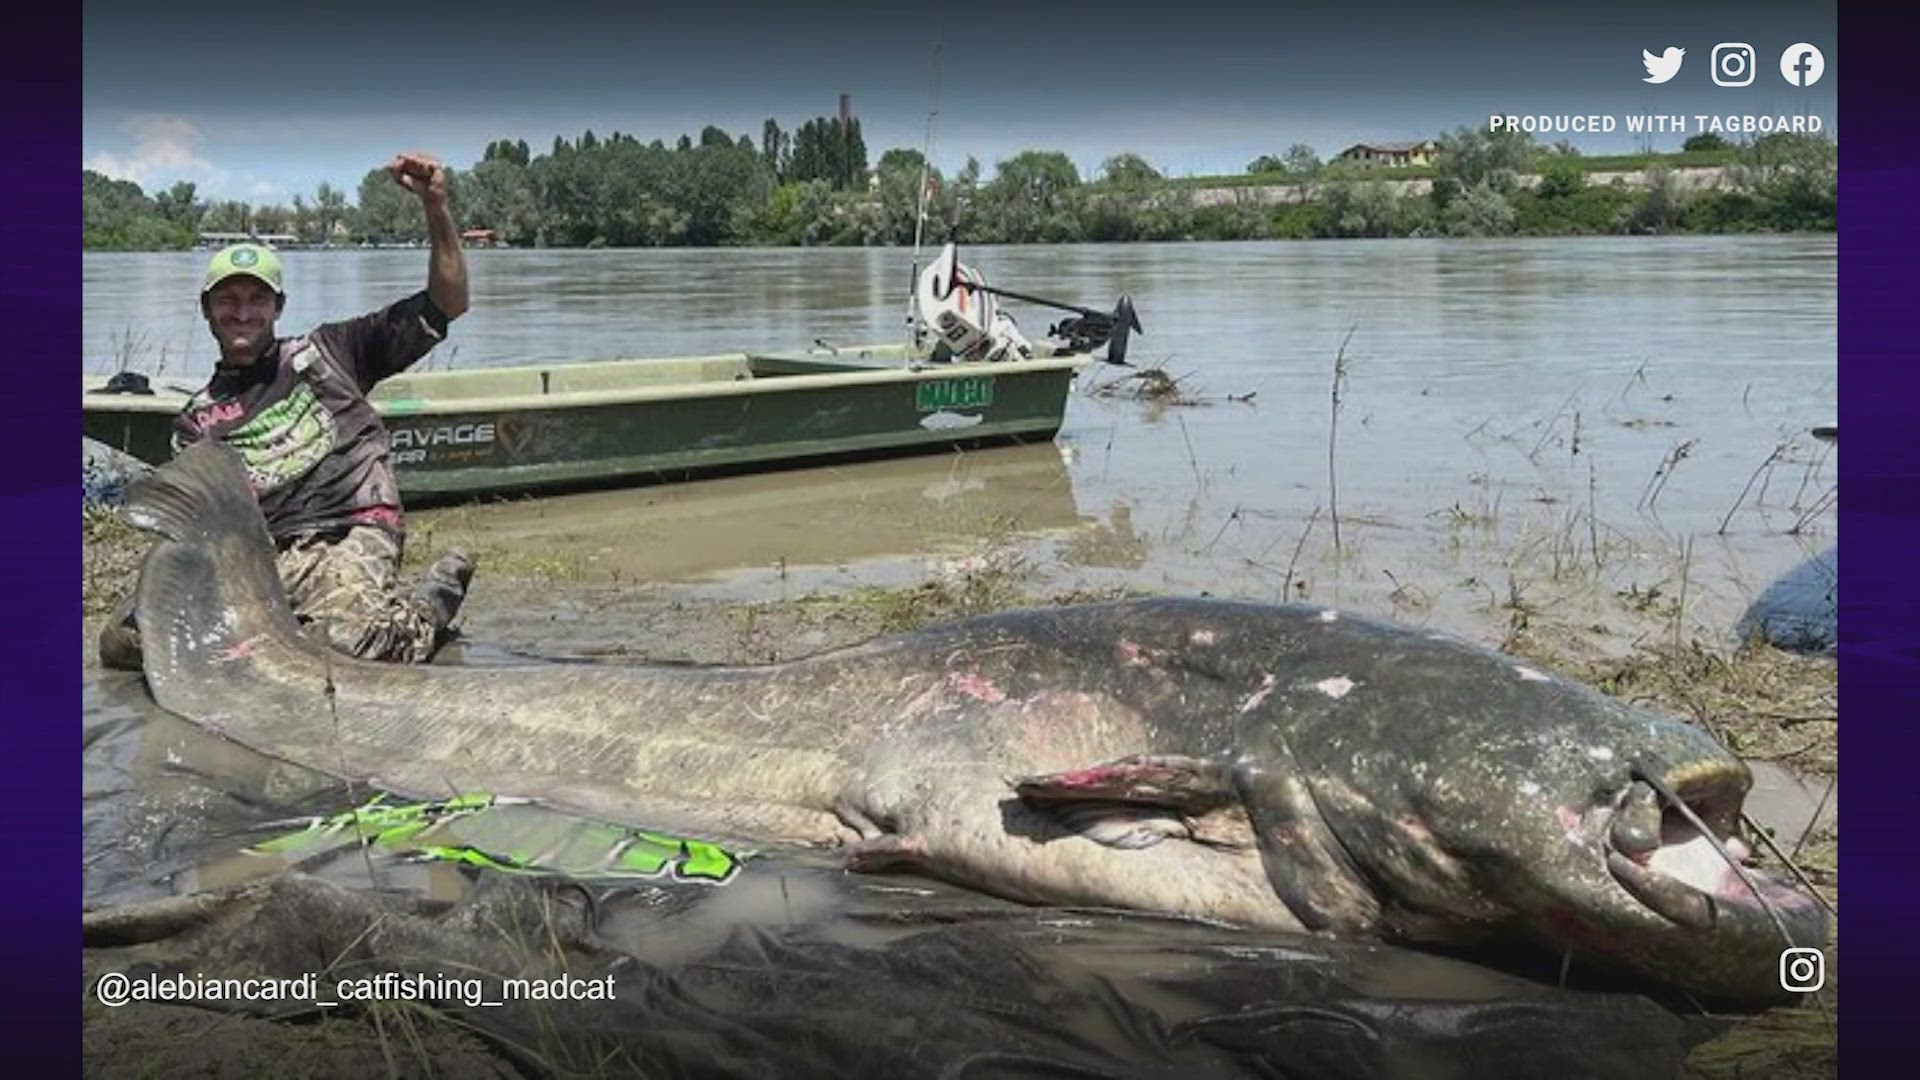 An Italian angler could be a new world record holder after catching a giant catfish in Italy's longest river.